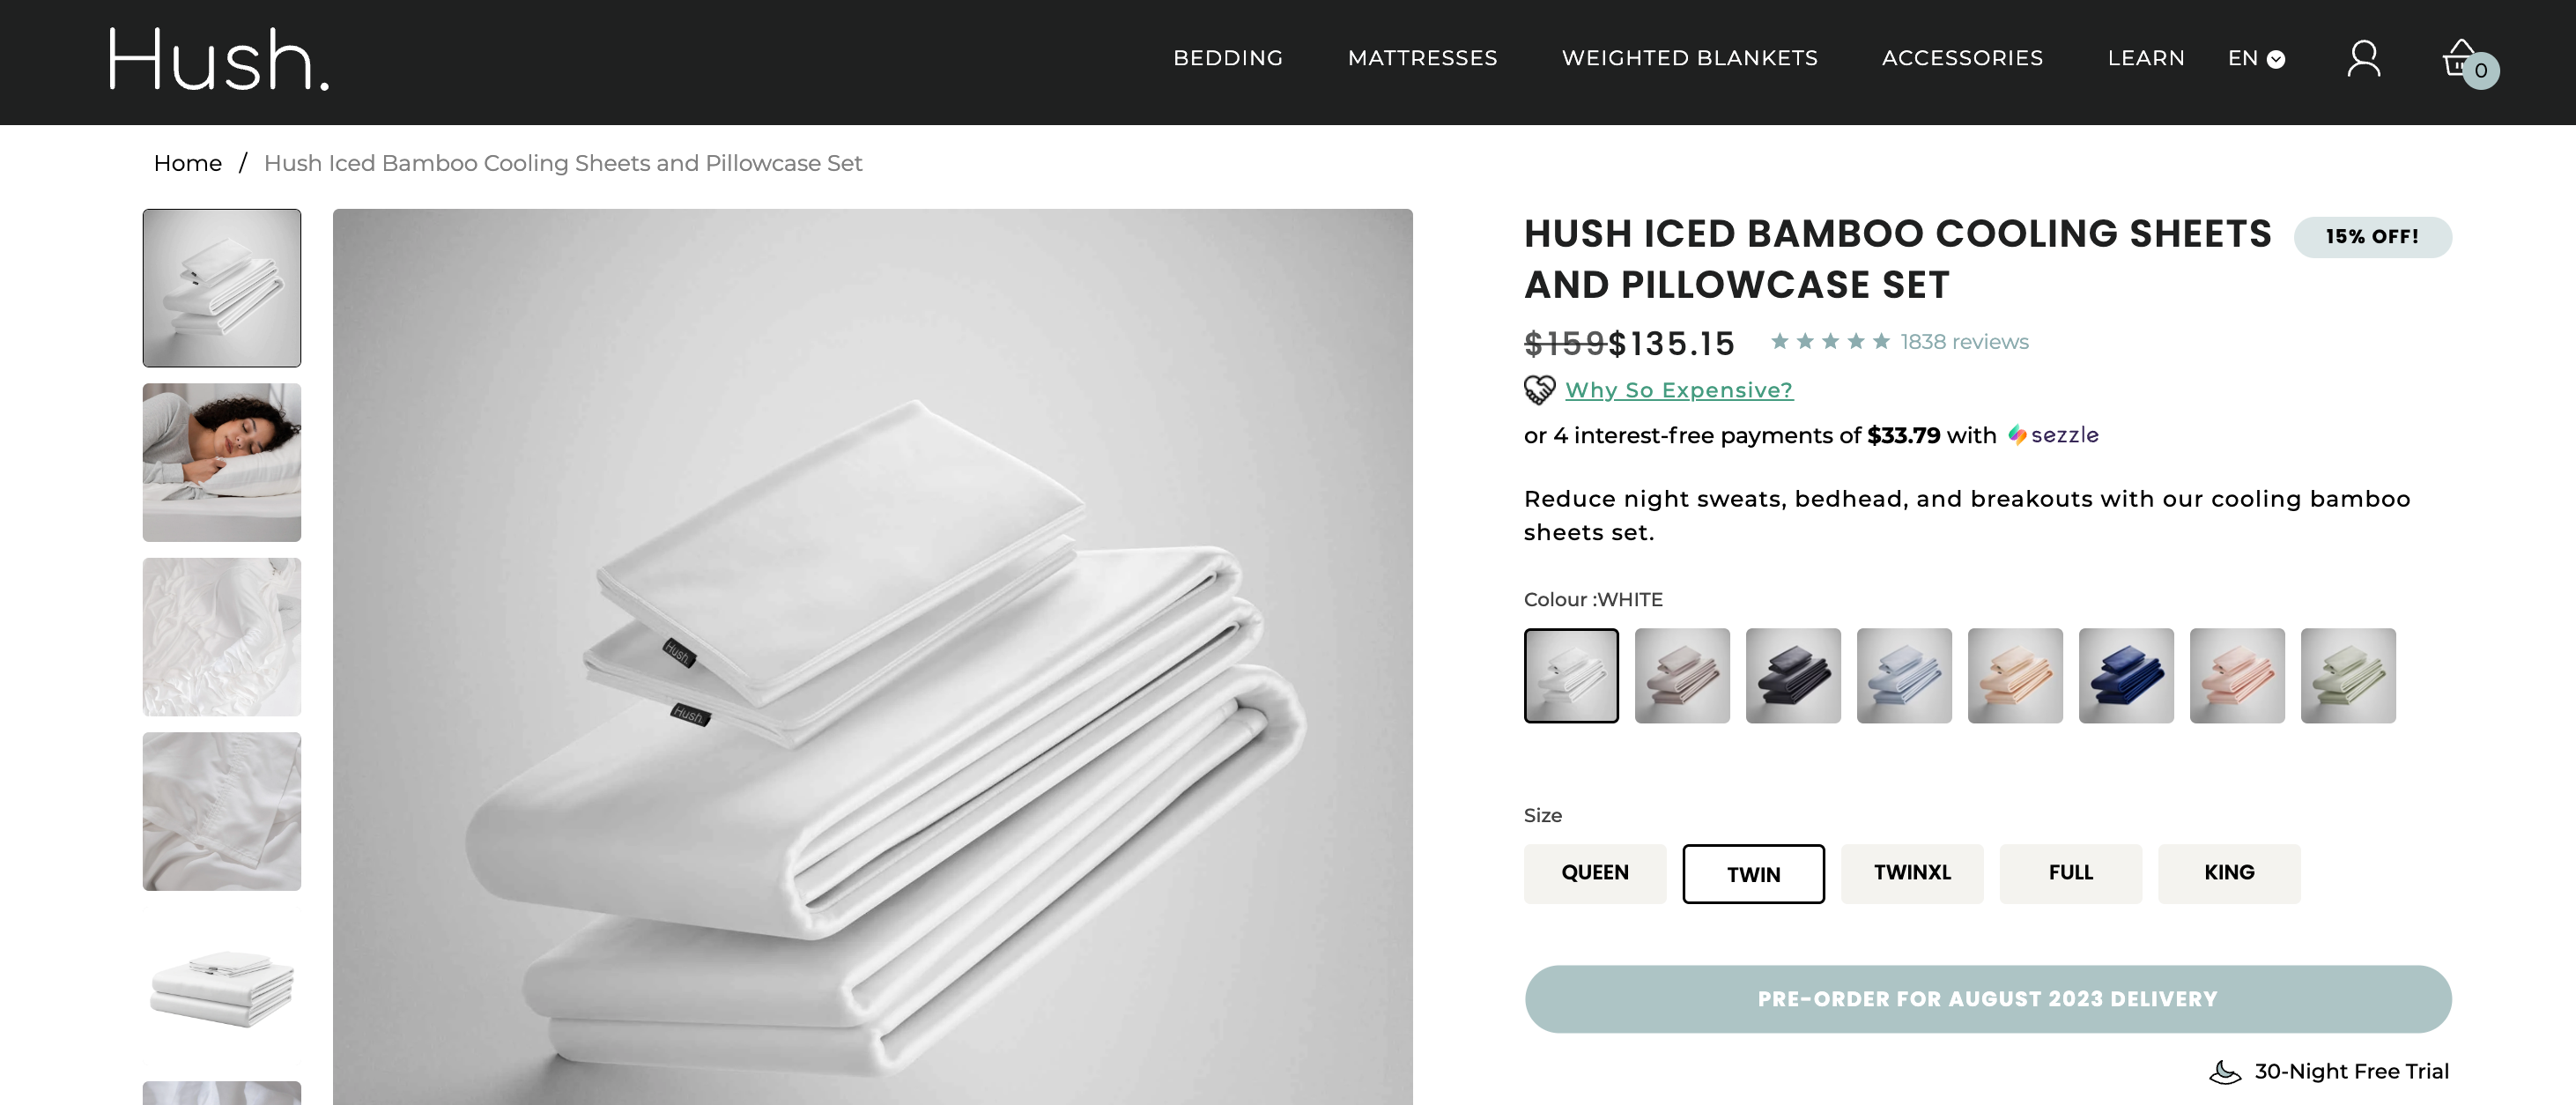 Ecommerce product page for online bedding business Hush